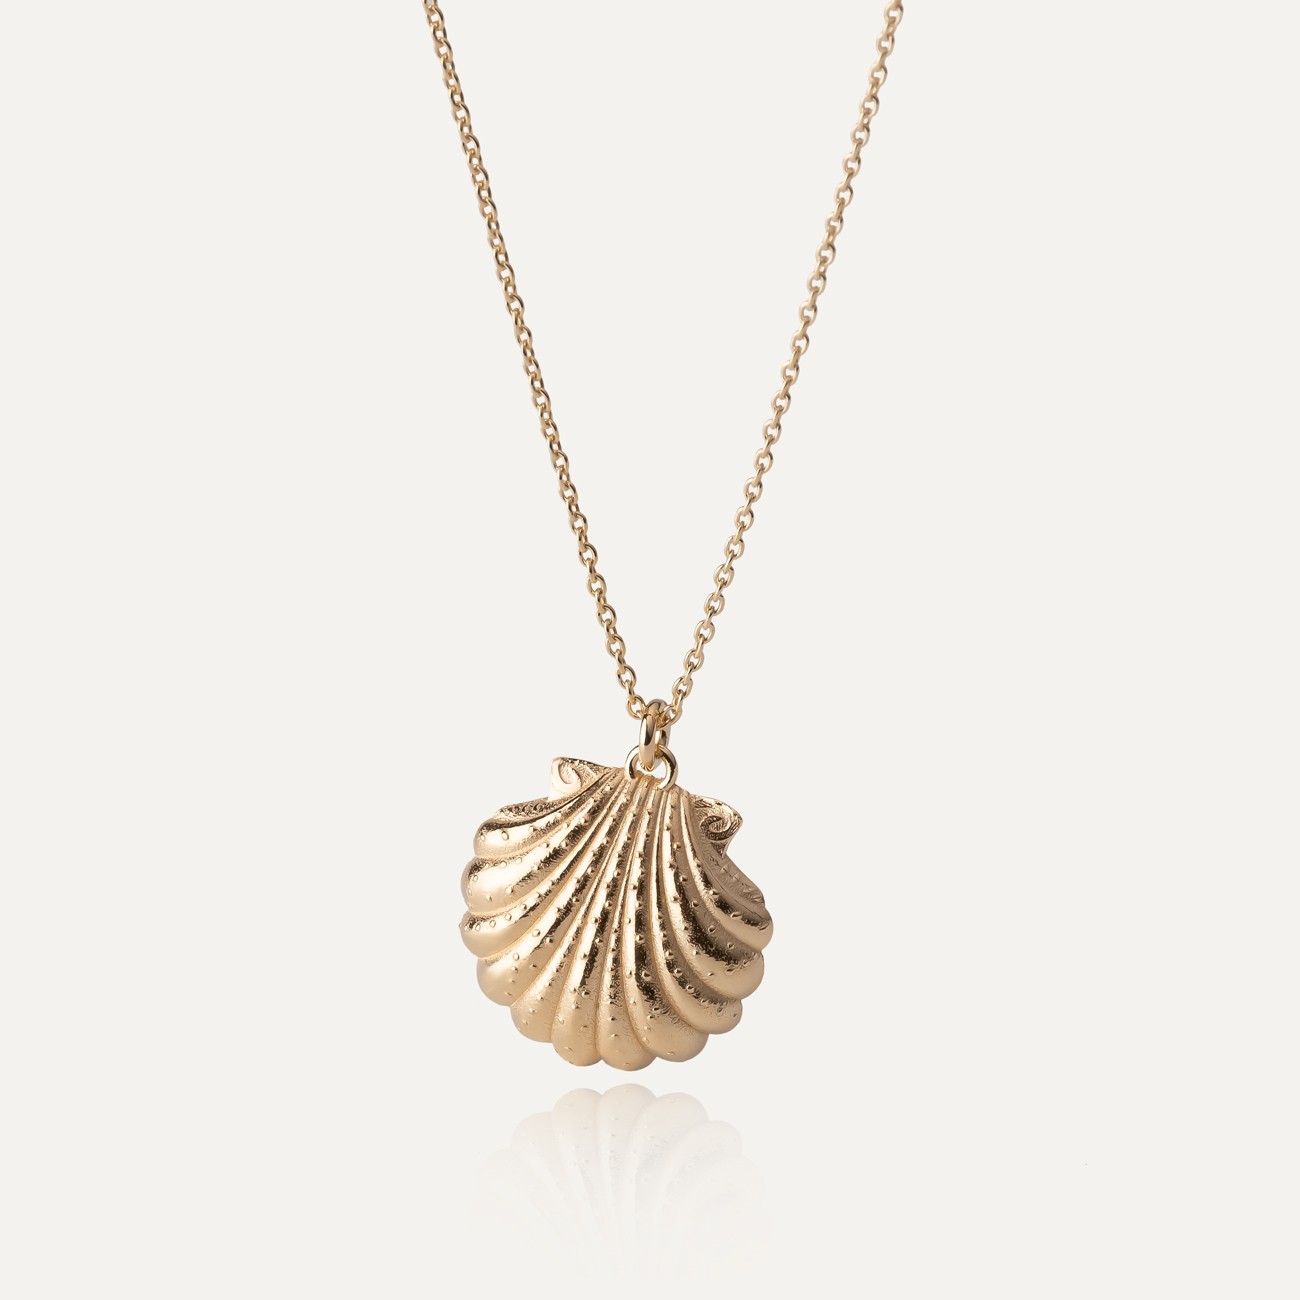 Seashell necklace, sterling silver 925